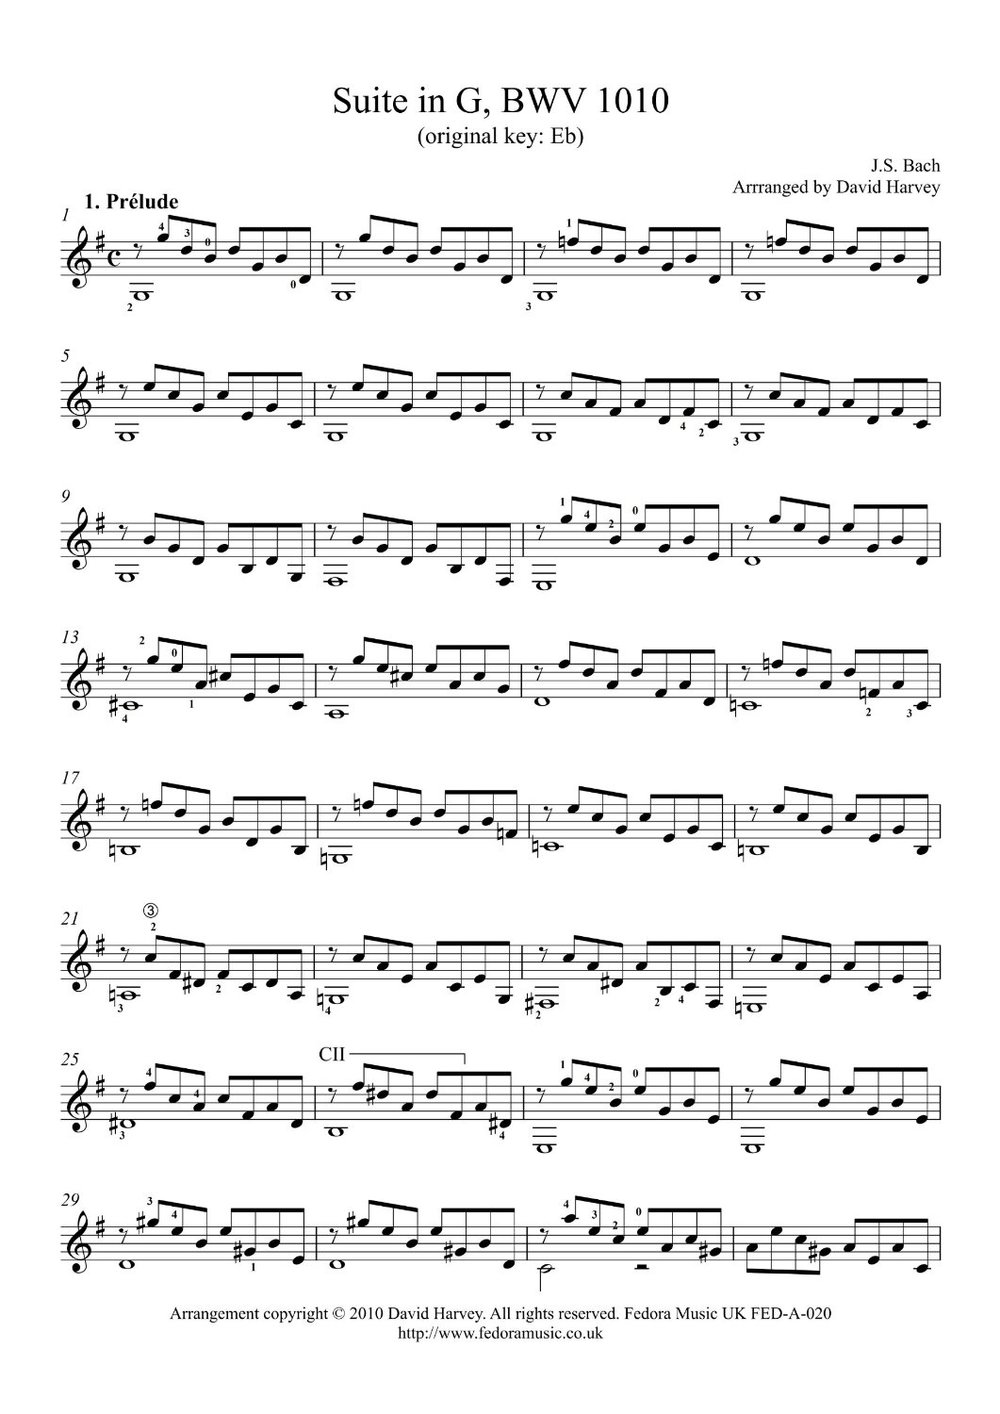 Suite in G, BWV 1010 (4th Cello Suite) - sample page